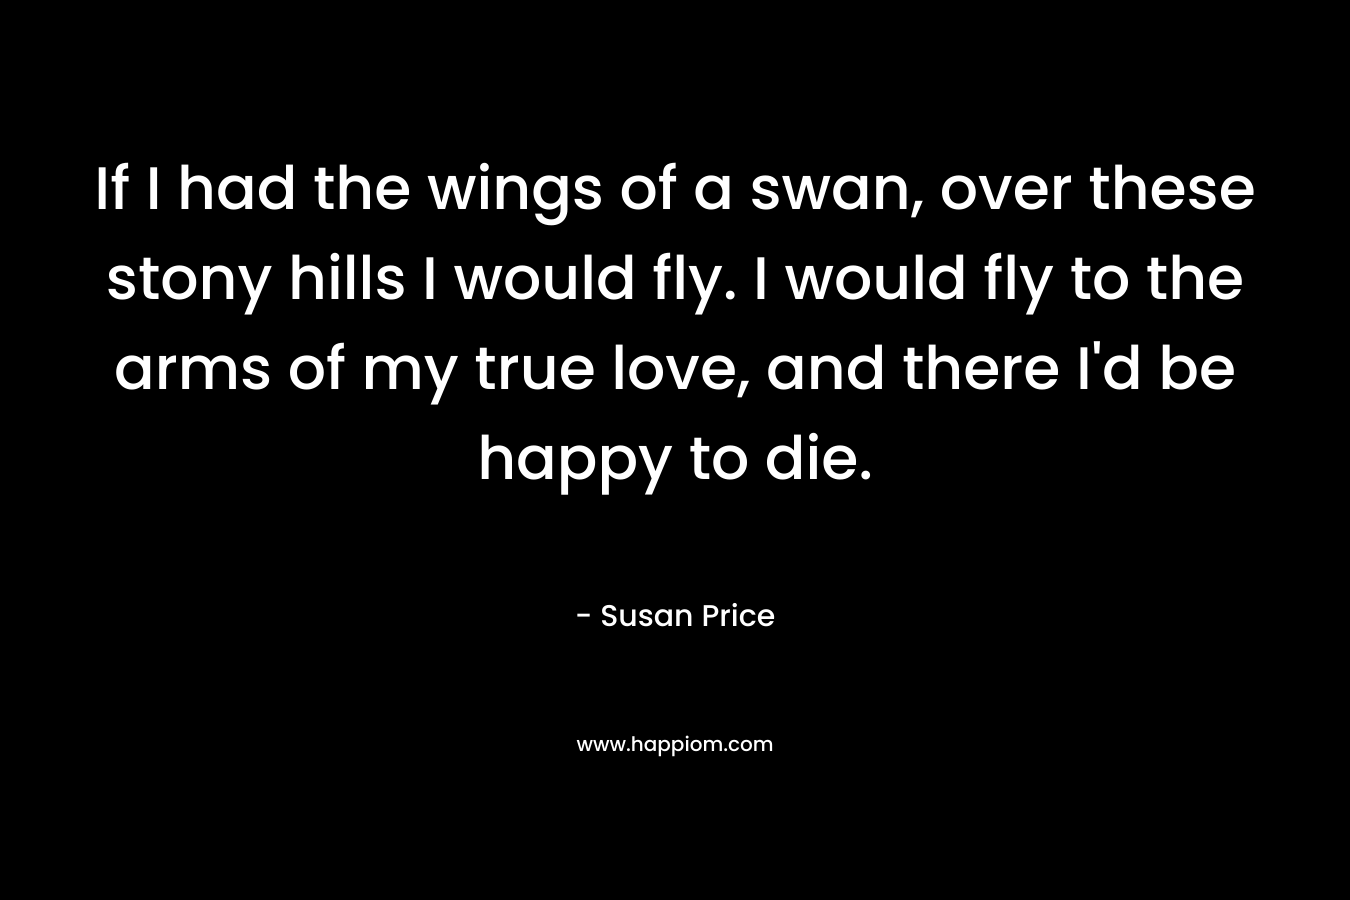 If I had the wings of a swan, over these stony hills I would fly. I would fly to the arms of my true love, and there I’d be happy to die. – Susan Price